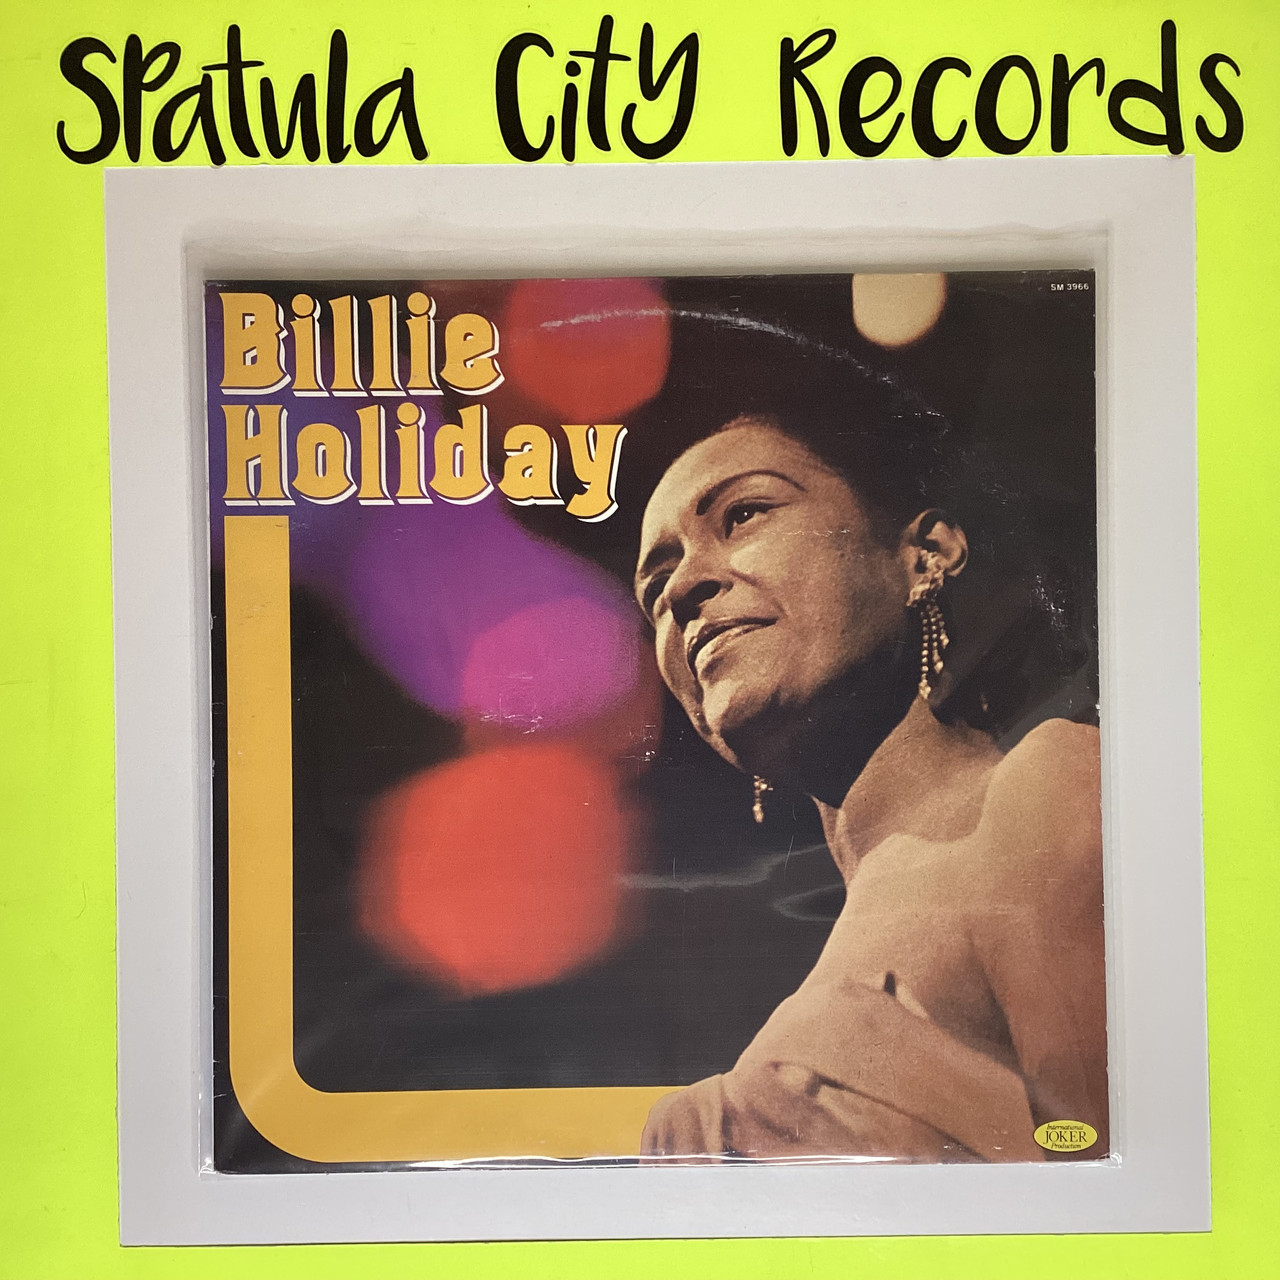 Billie Holiday - Billie Holiday self-titled - ITALY IMPORT - vinyl record LP